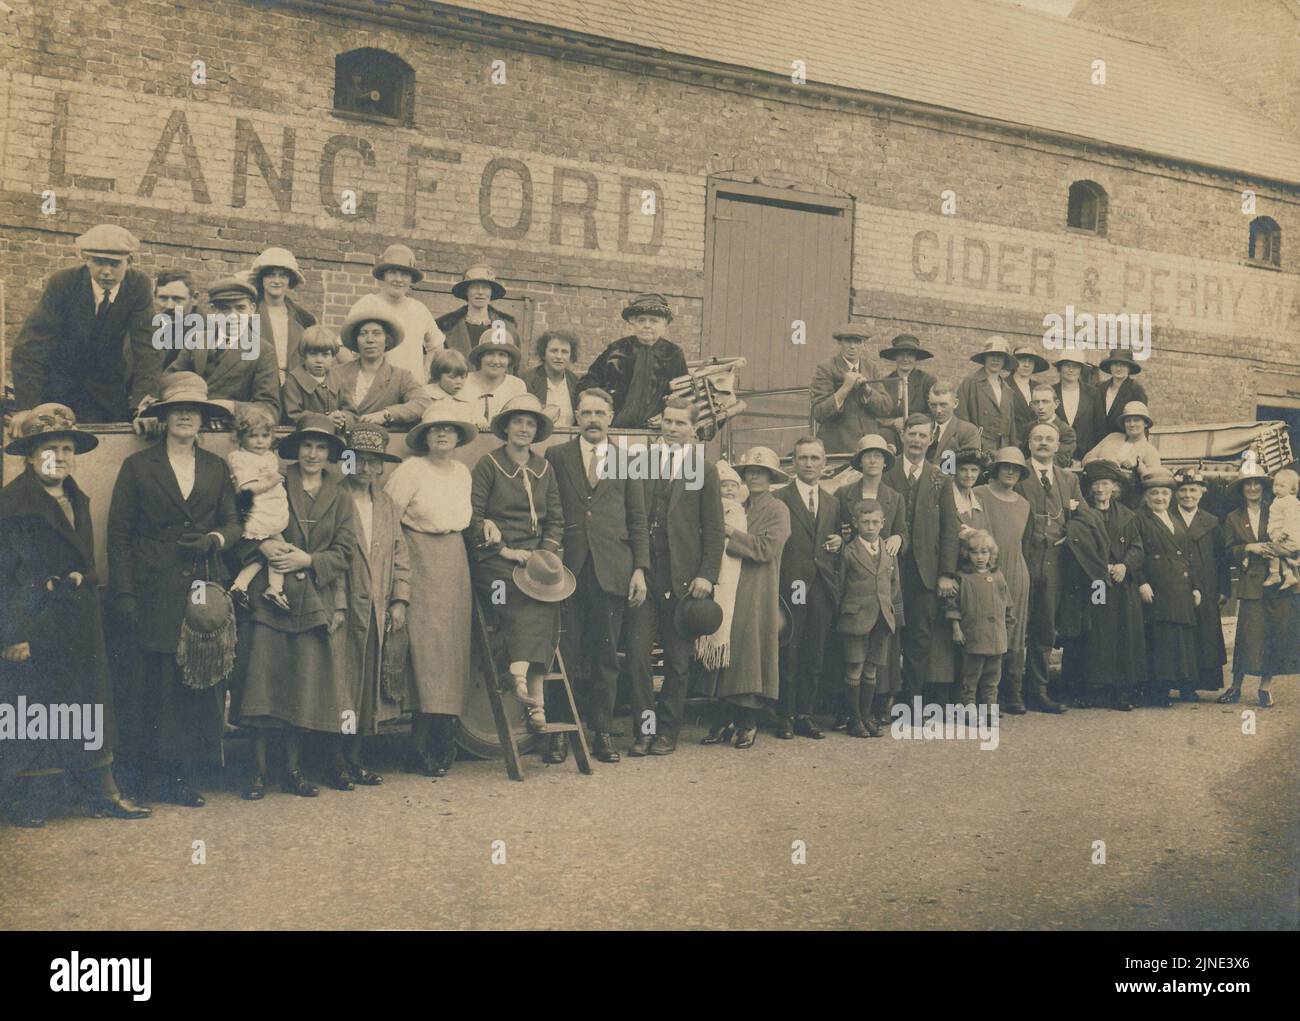 Historical Archive Image of workers outside the Langford Cider & Perry Factory in Hereford, England, c1920s. Ready for a factory outing. Stock Photo